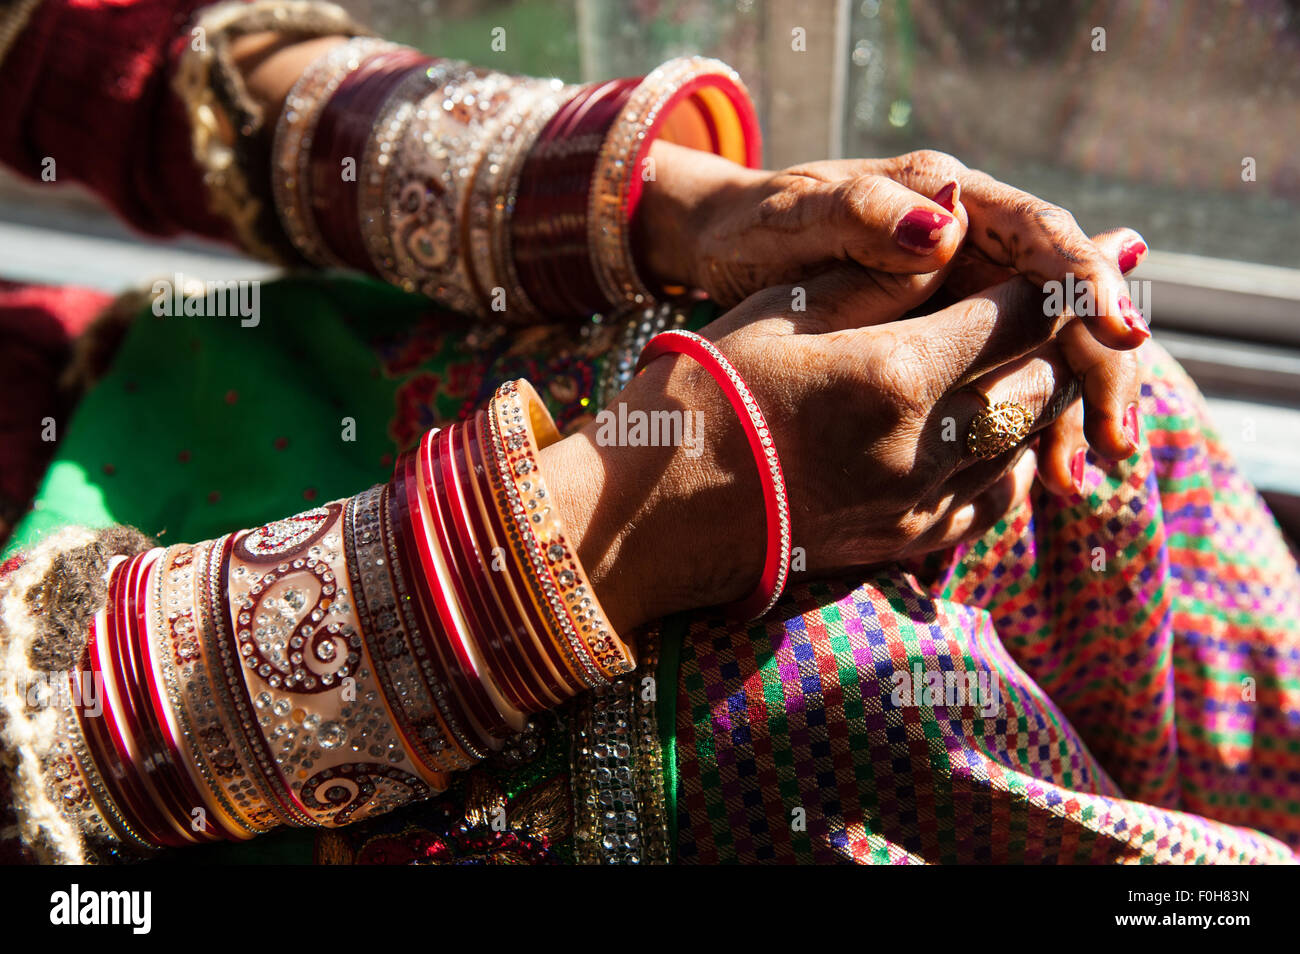 Shimla Himachal Pradesh India A Newlywed Bride With Traditional Stock Photo Alamy Drooling over this himachali bride's wedding day look!! https www alamy com stock photo shimla himachal pradesh india a newlywed bride with traditional rows 86431401 html